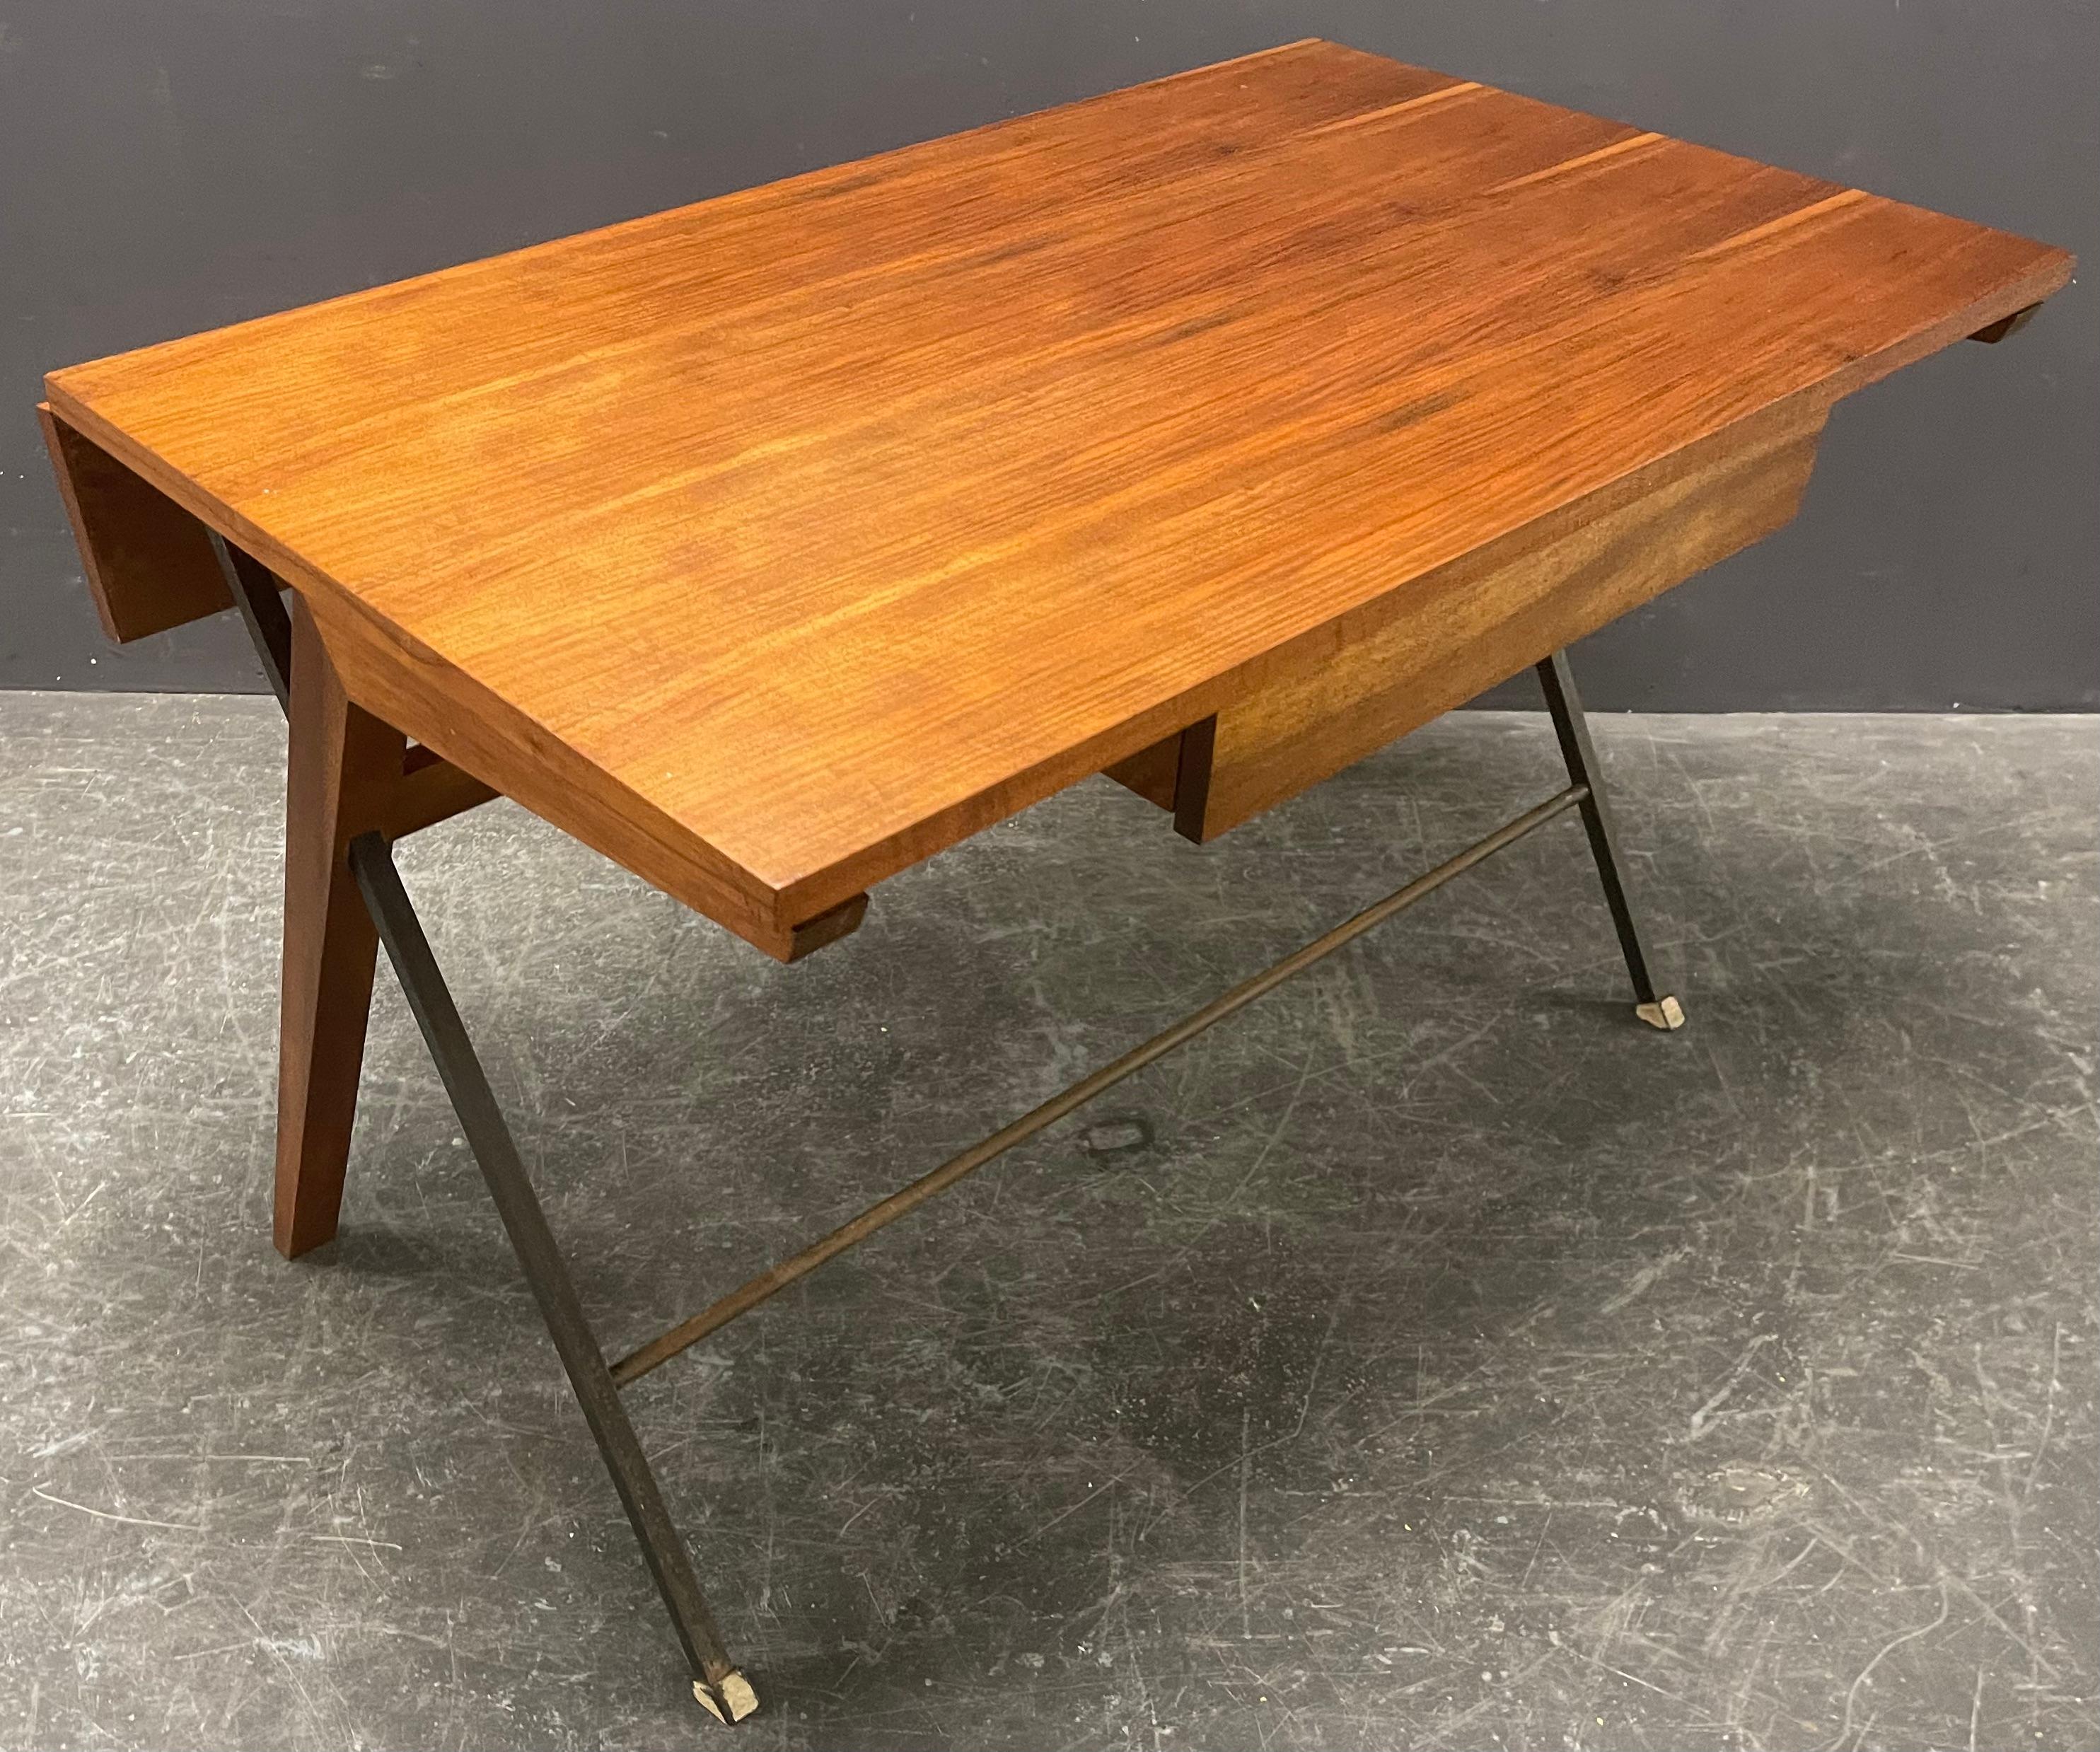 Great italien prototype desk from an architects estate full of wonderful mid century design and prototypes. we are very happy to offer this iconic italien desk , that has an breathtaking shape and combination of materials. so simple and elegant.....